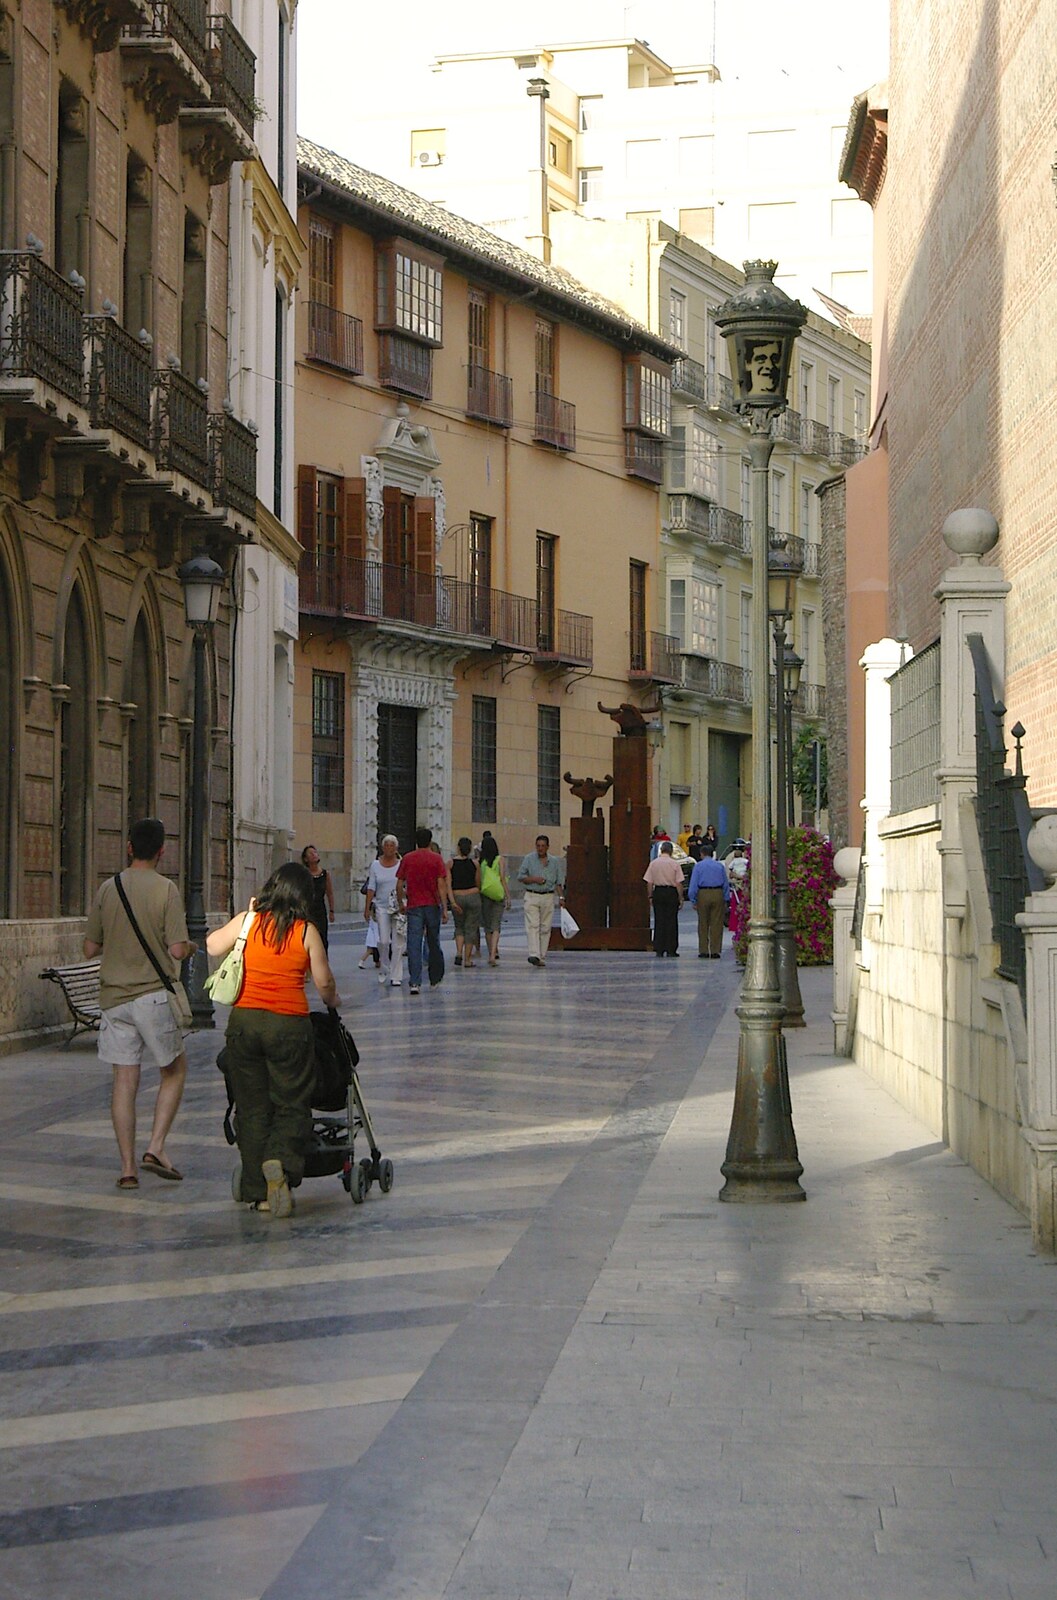 A marbled back street from Working at Telefónica, Malaga, Spain - 6th June 2006